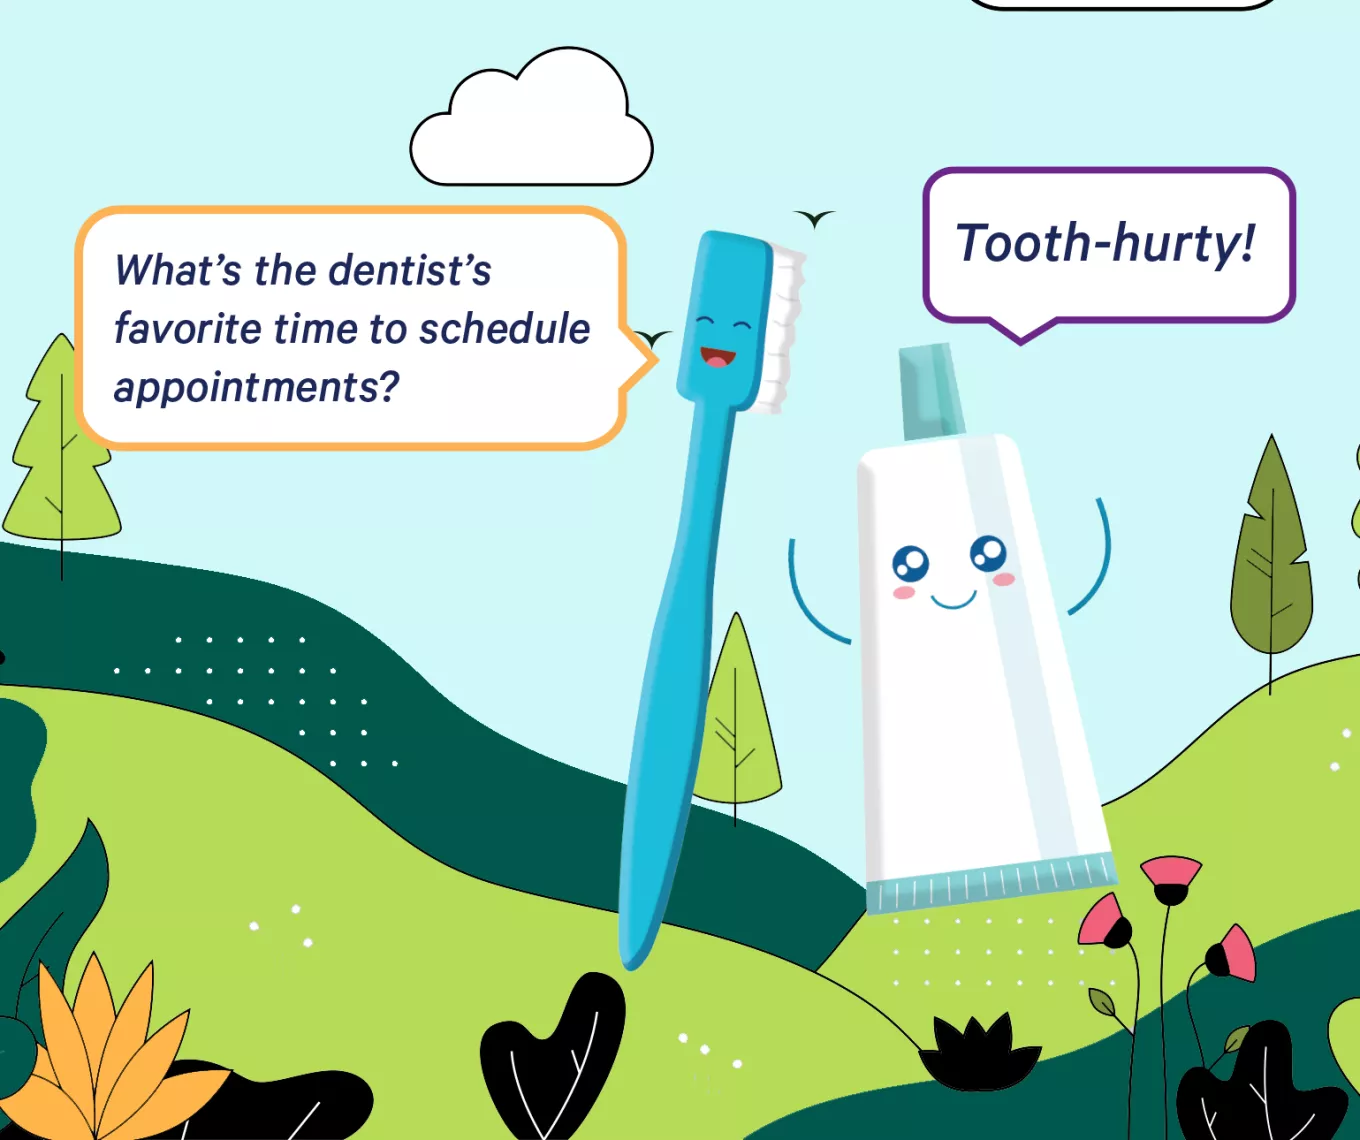 What's the dentist's favorite time to schedule appointments? Tooth-hurty!